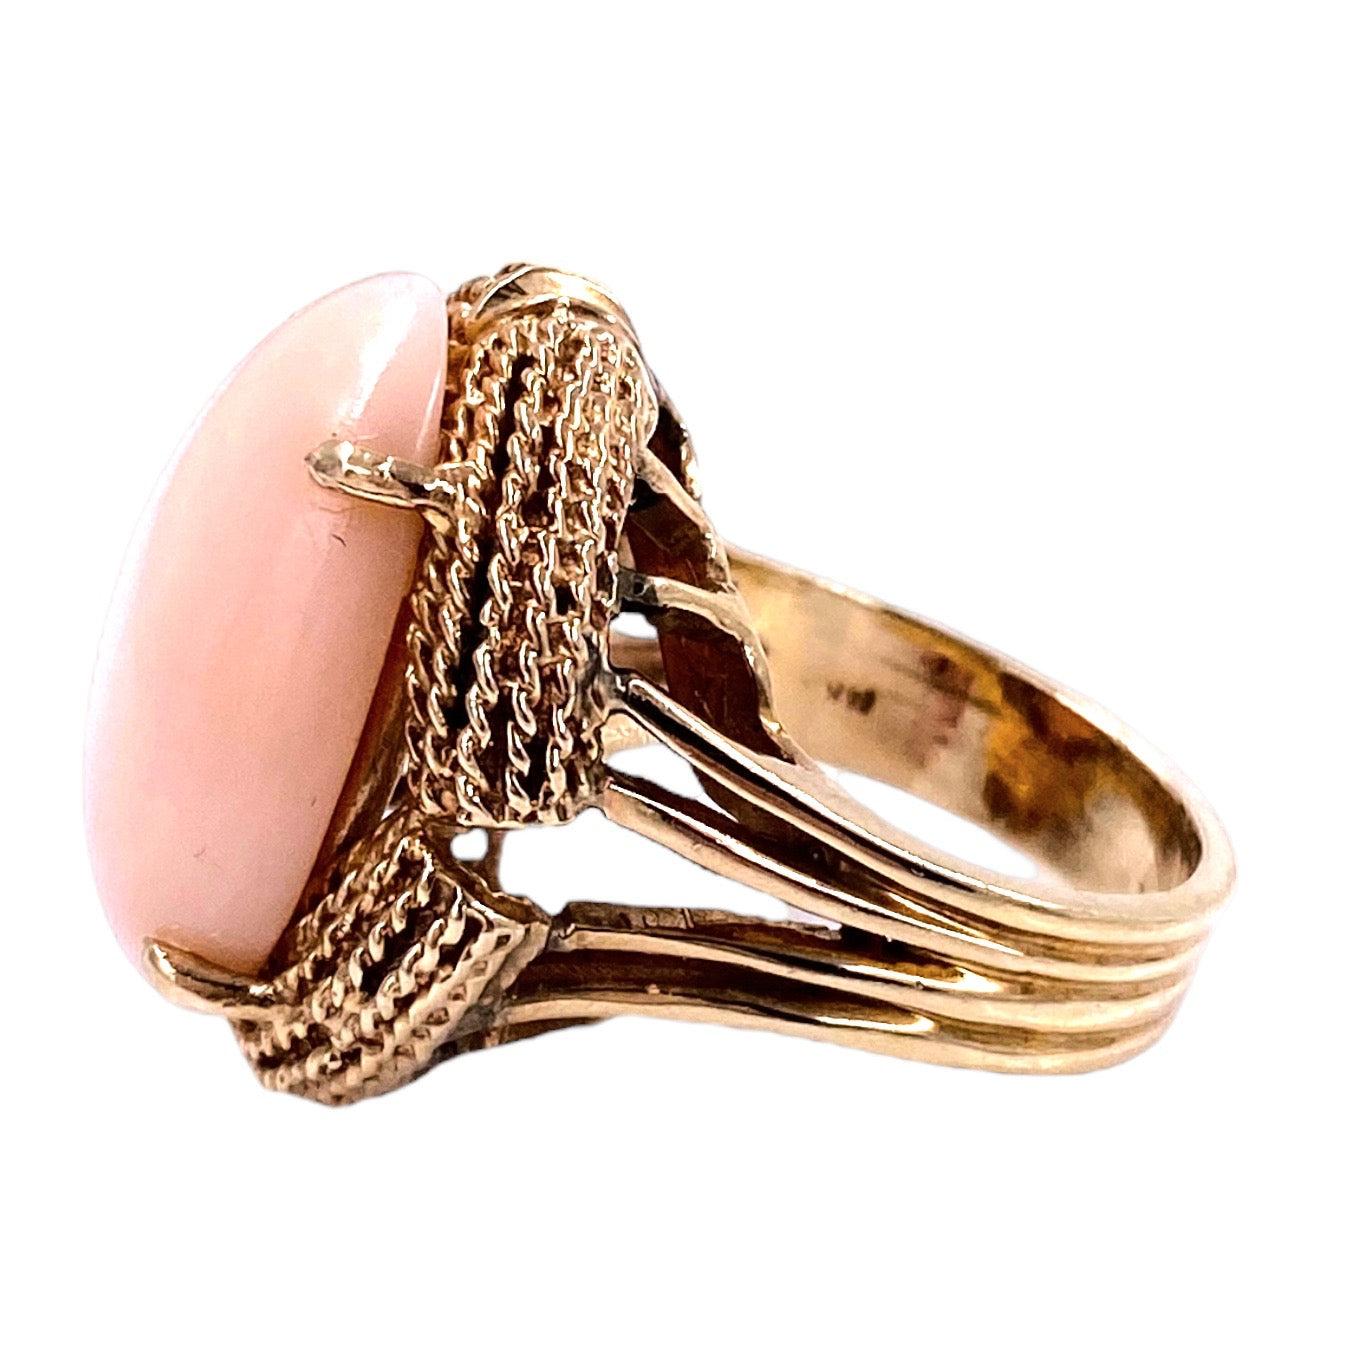 Vintage 14K Gold Angel Skin Coral Ring In Good Condition For Sale In Henderson, NV